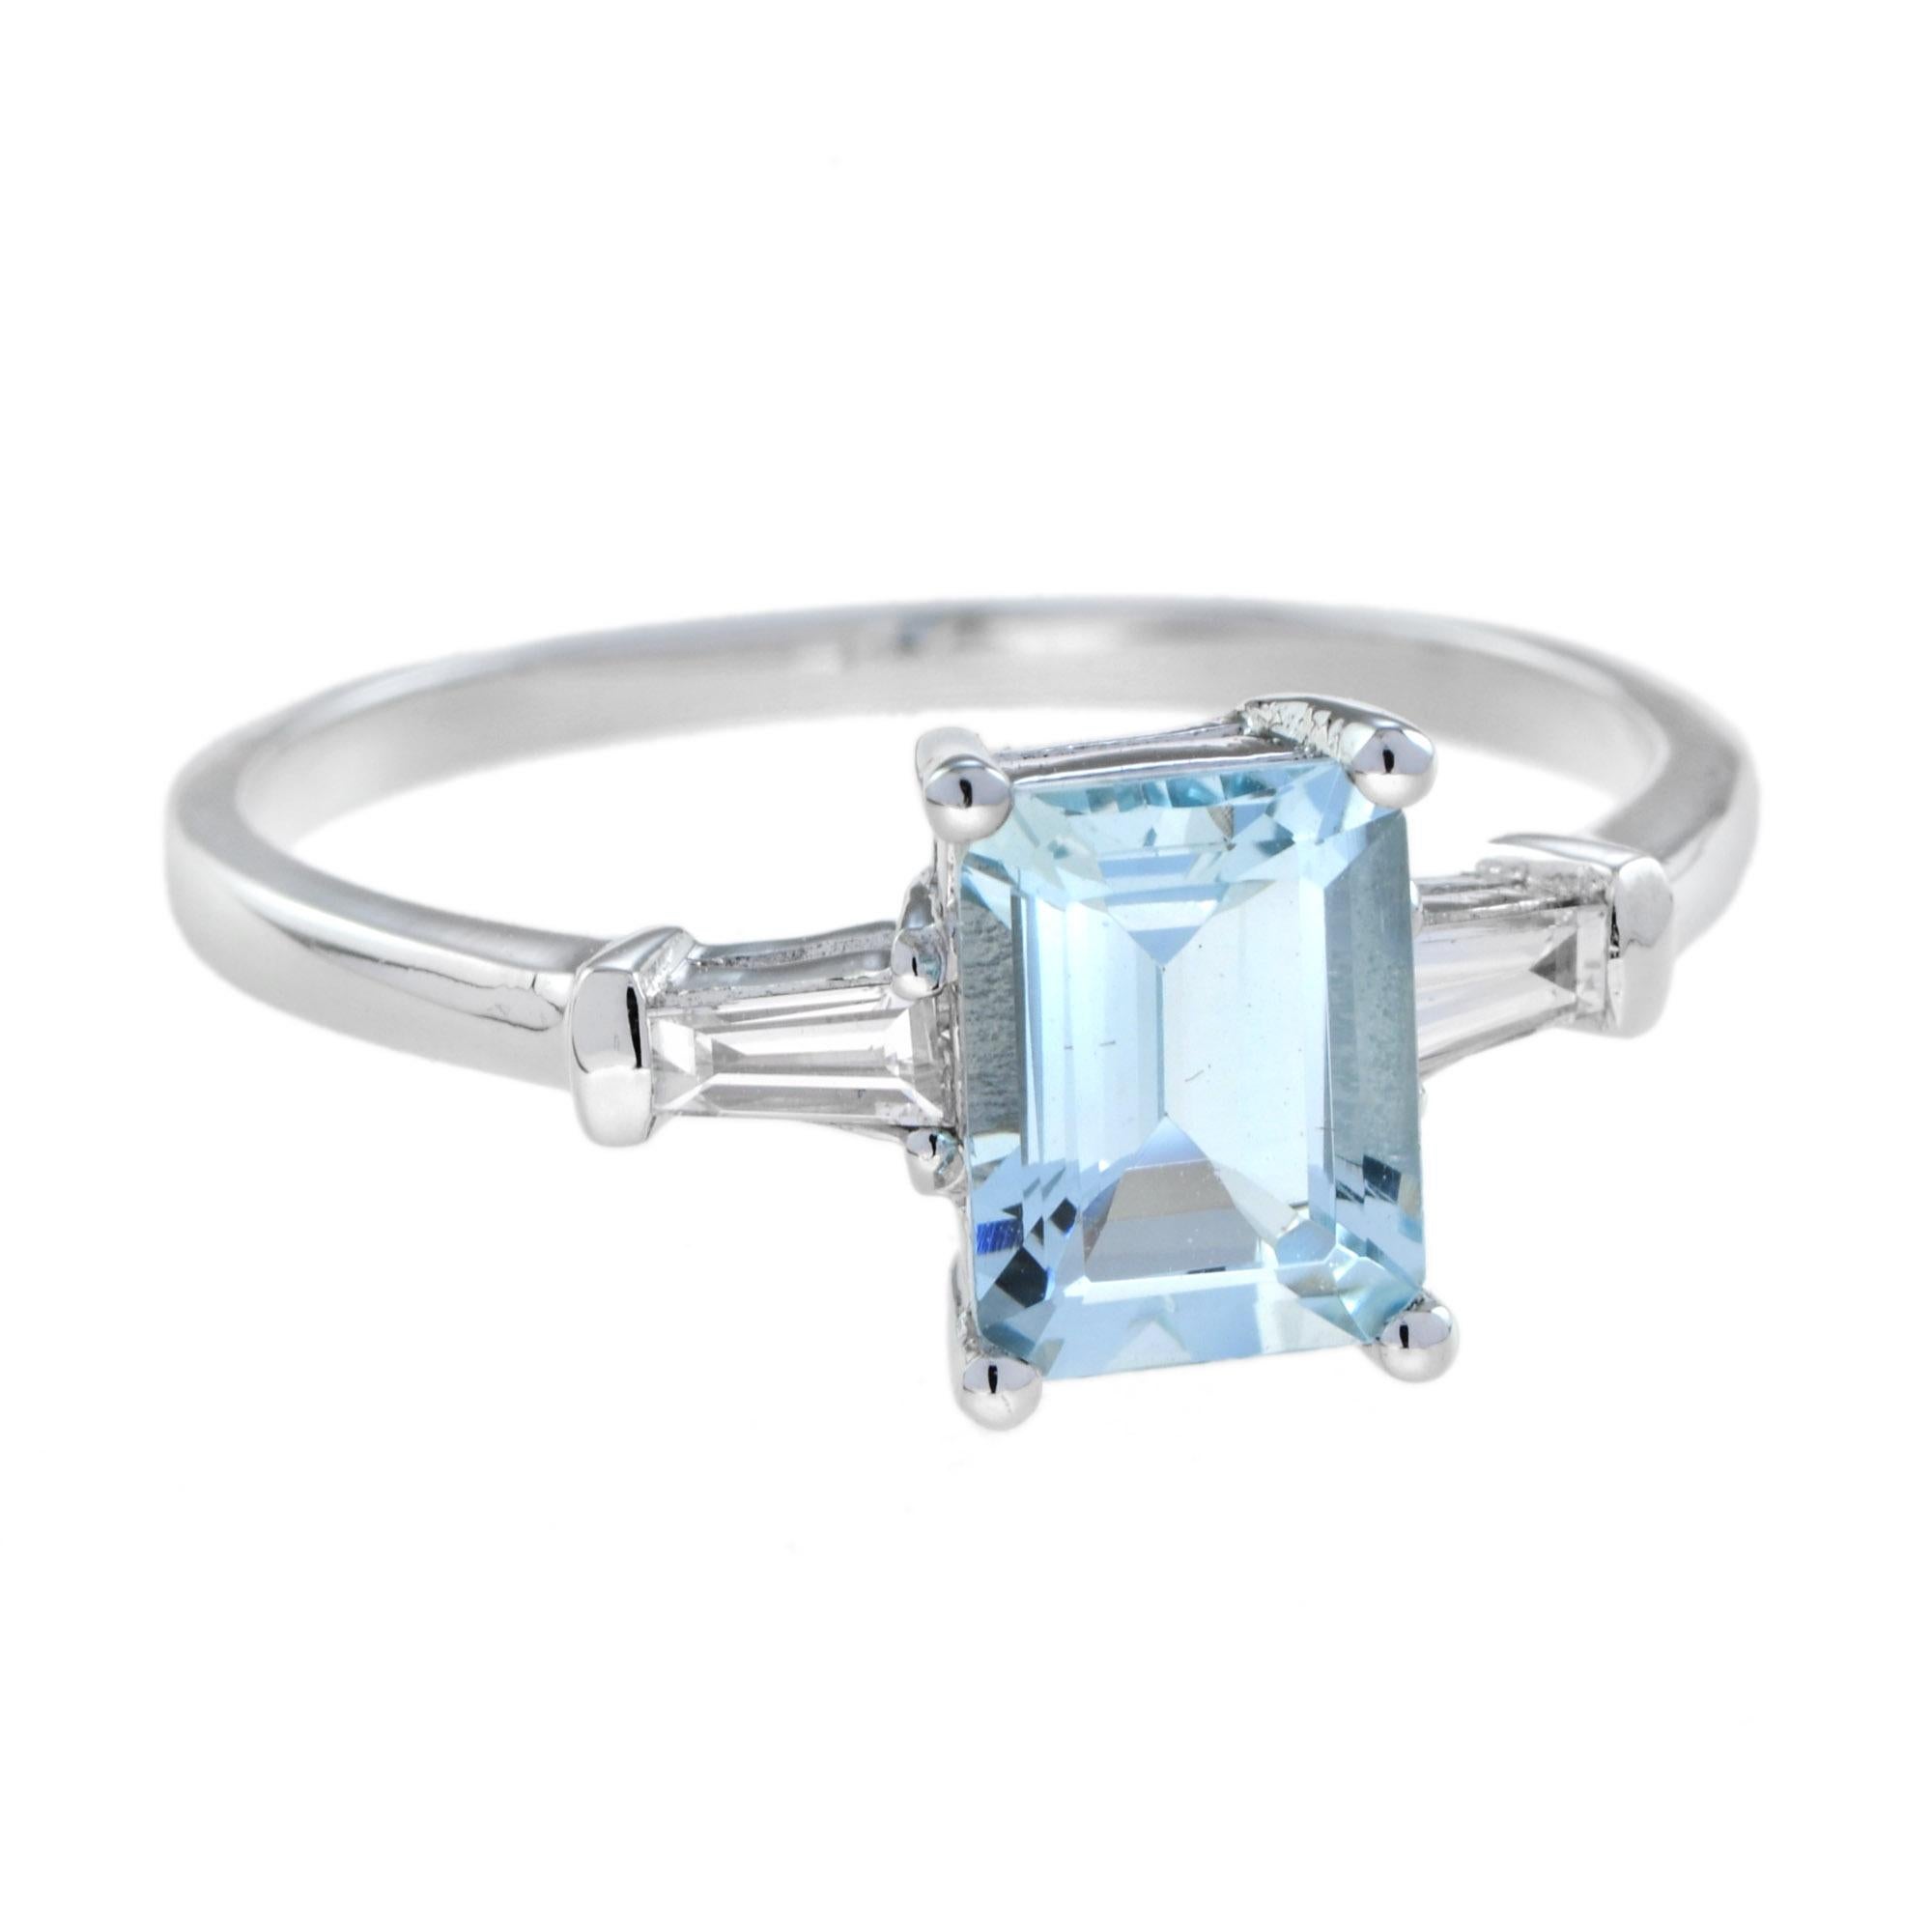 This beautiful ring has a single 8x6 mm. natural aquamarine with traditional emerald cut, prong-set in an elegant mount with daylight shoulders. Featuring a baguette diamond on each shoulder in solid 18K white gold. 

Ring Information
Style: Art